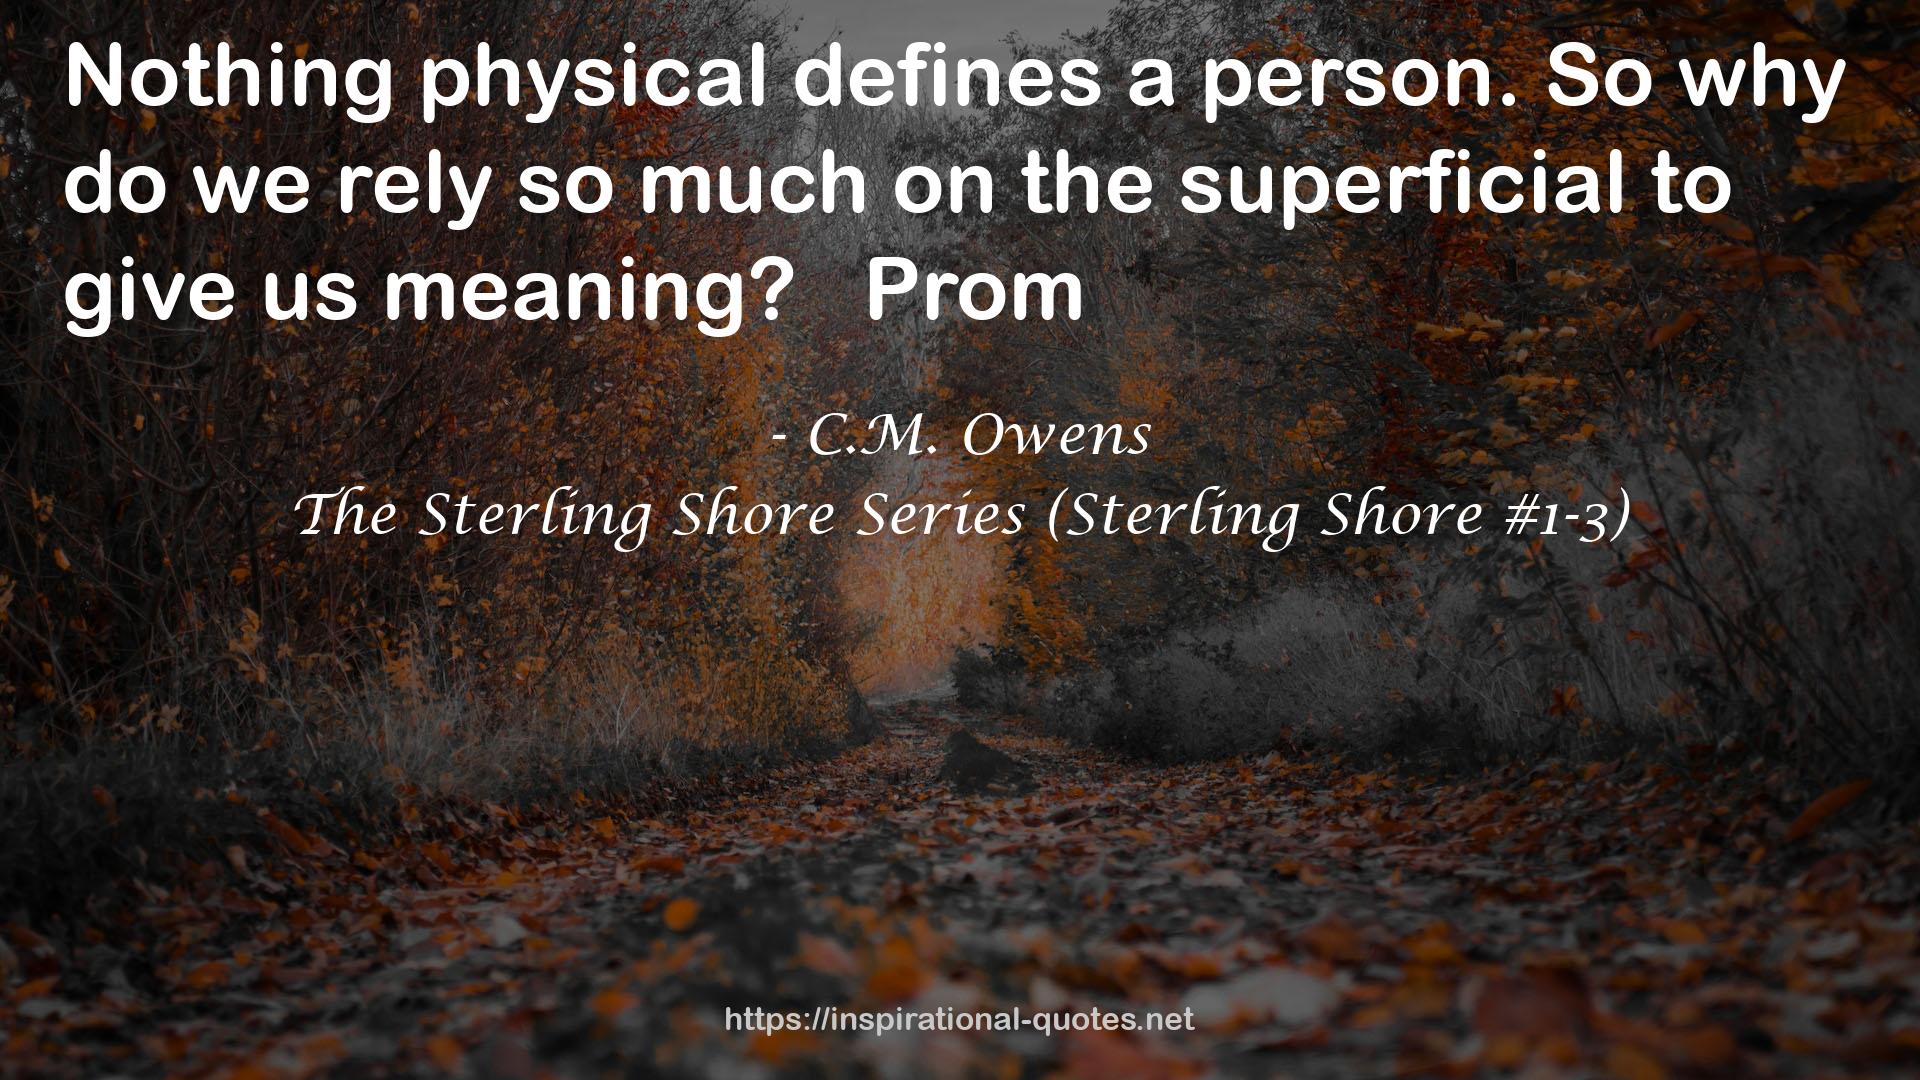 The Sterling Shore Series (Sterling Shore #1-3) QUOTES